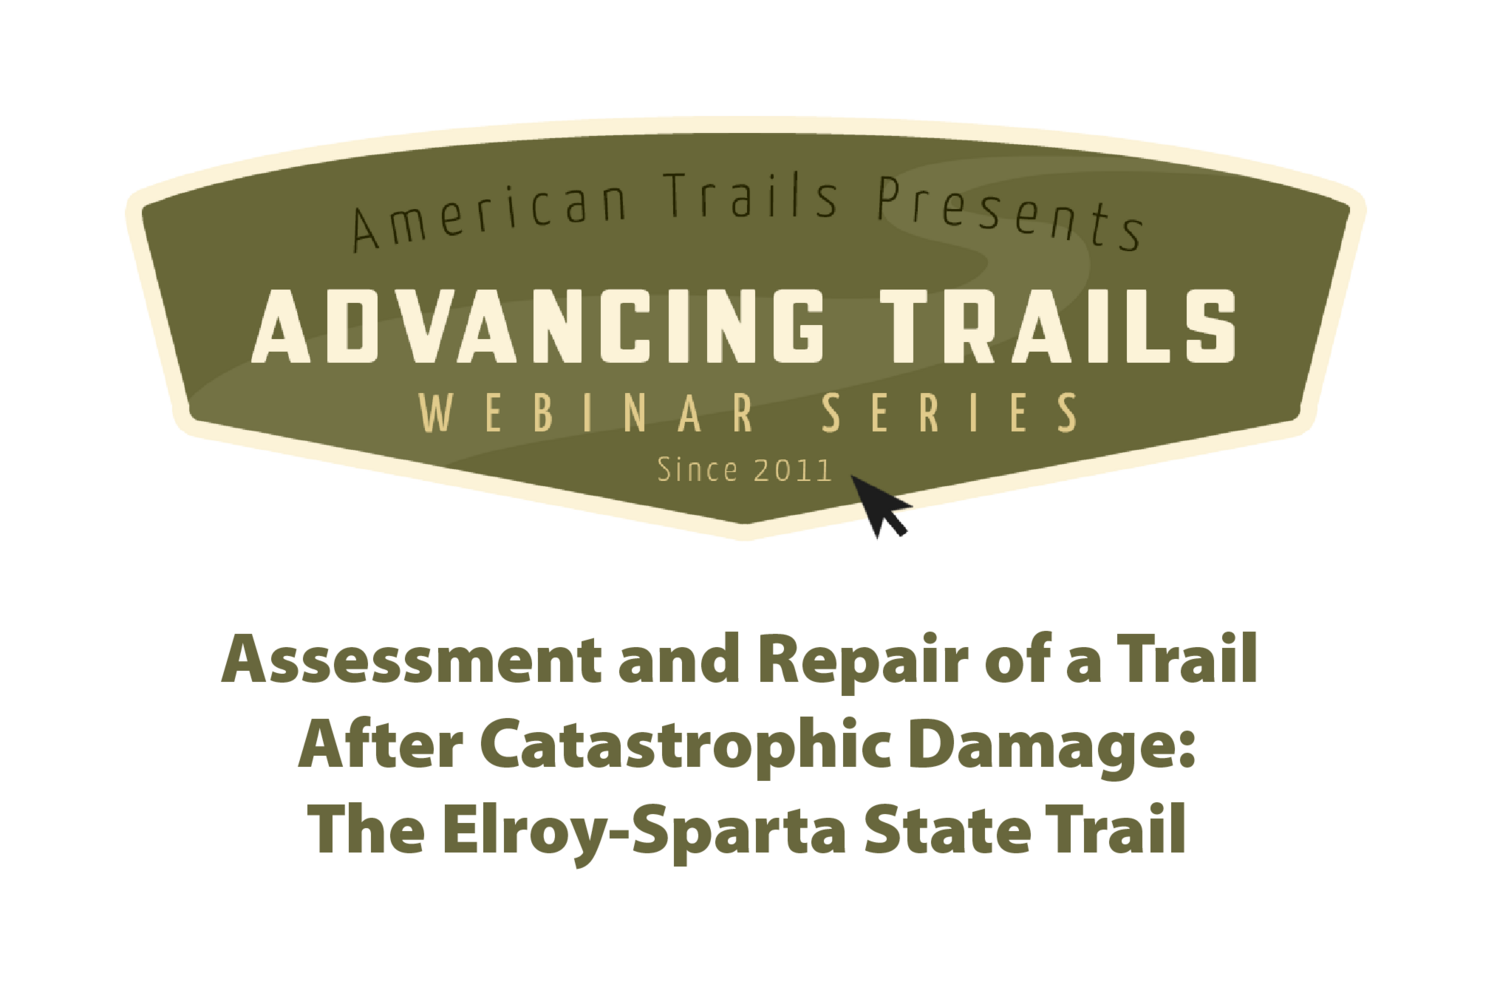 Assessment and Repair of a Trail After Catastrophic Damage: The Elroy-Sparta State Trail (RECORDING)